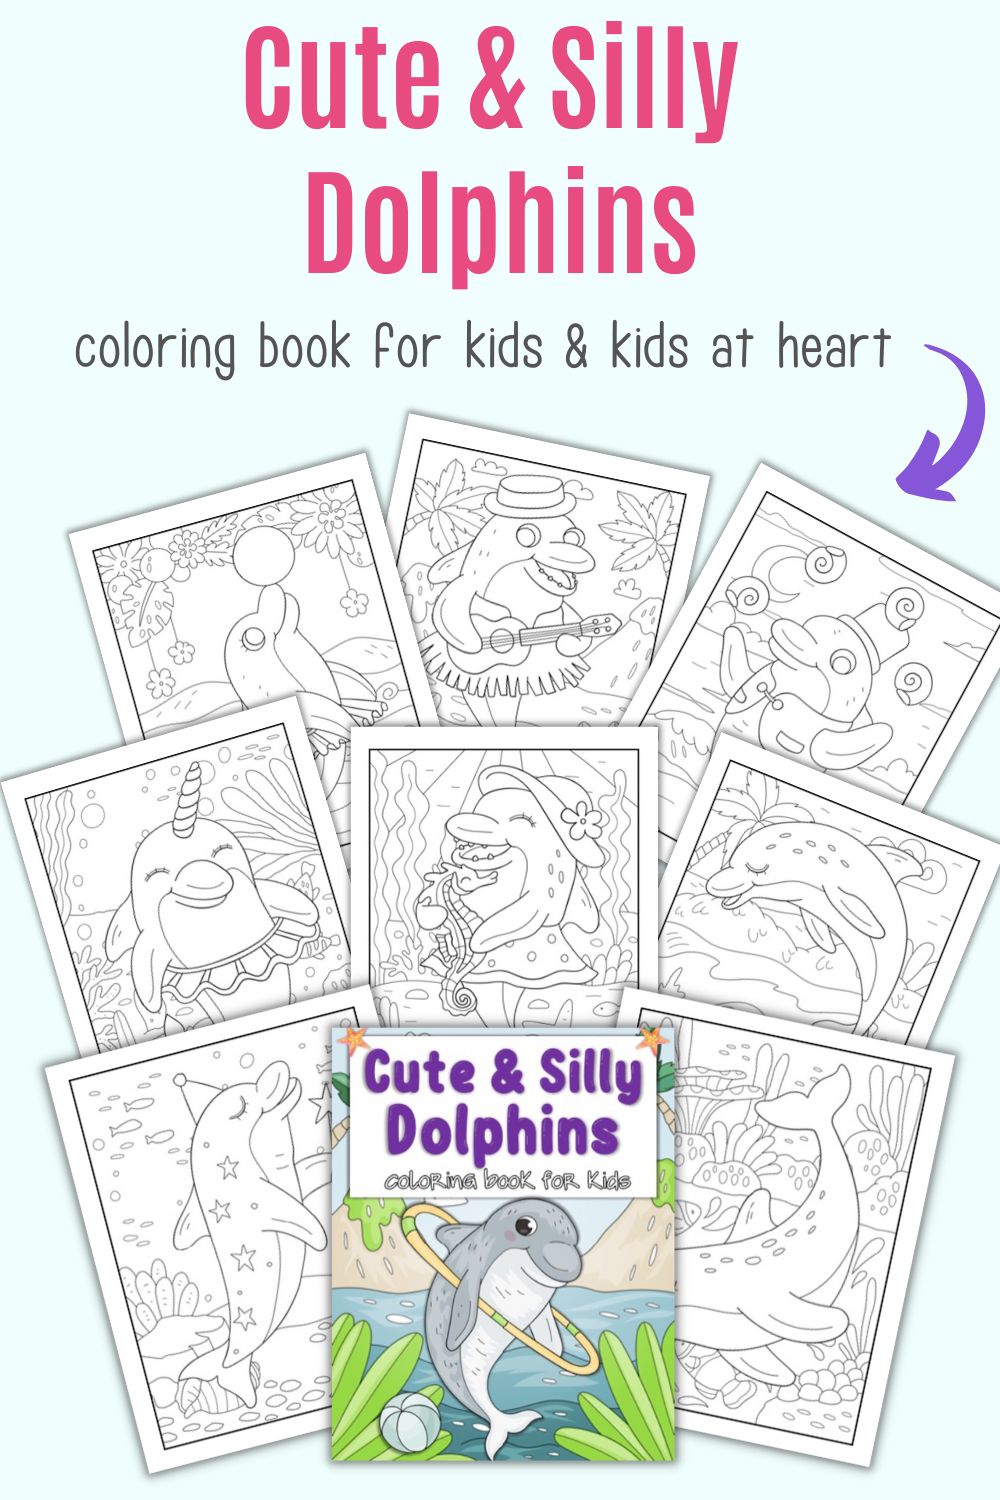 Text "cute & silly dolphins coloring book for kids and kids at heart" with a preview of nine pages of a dolphin coloring book for kids.